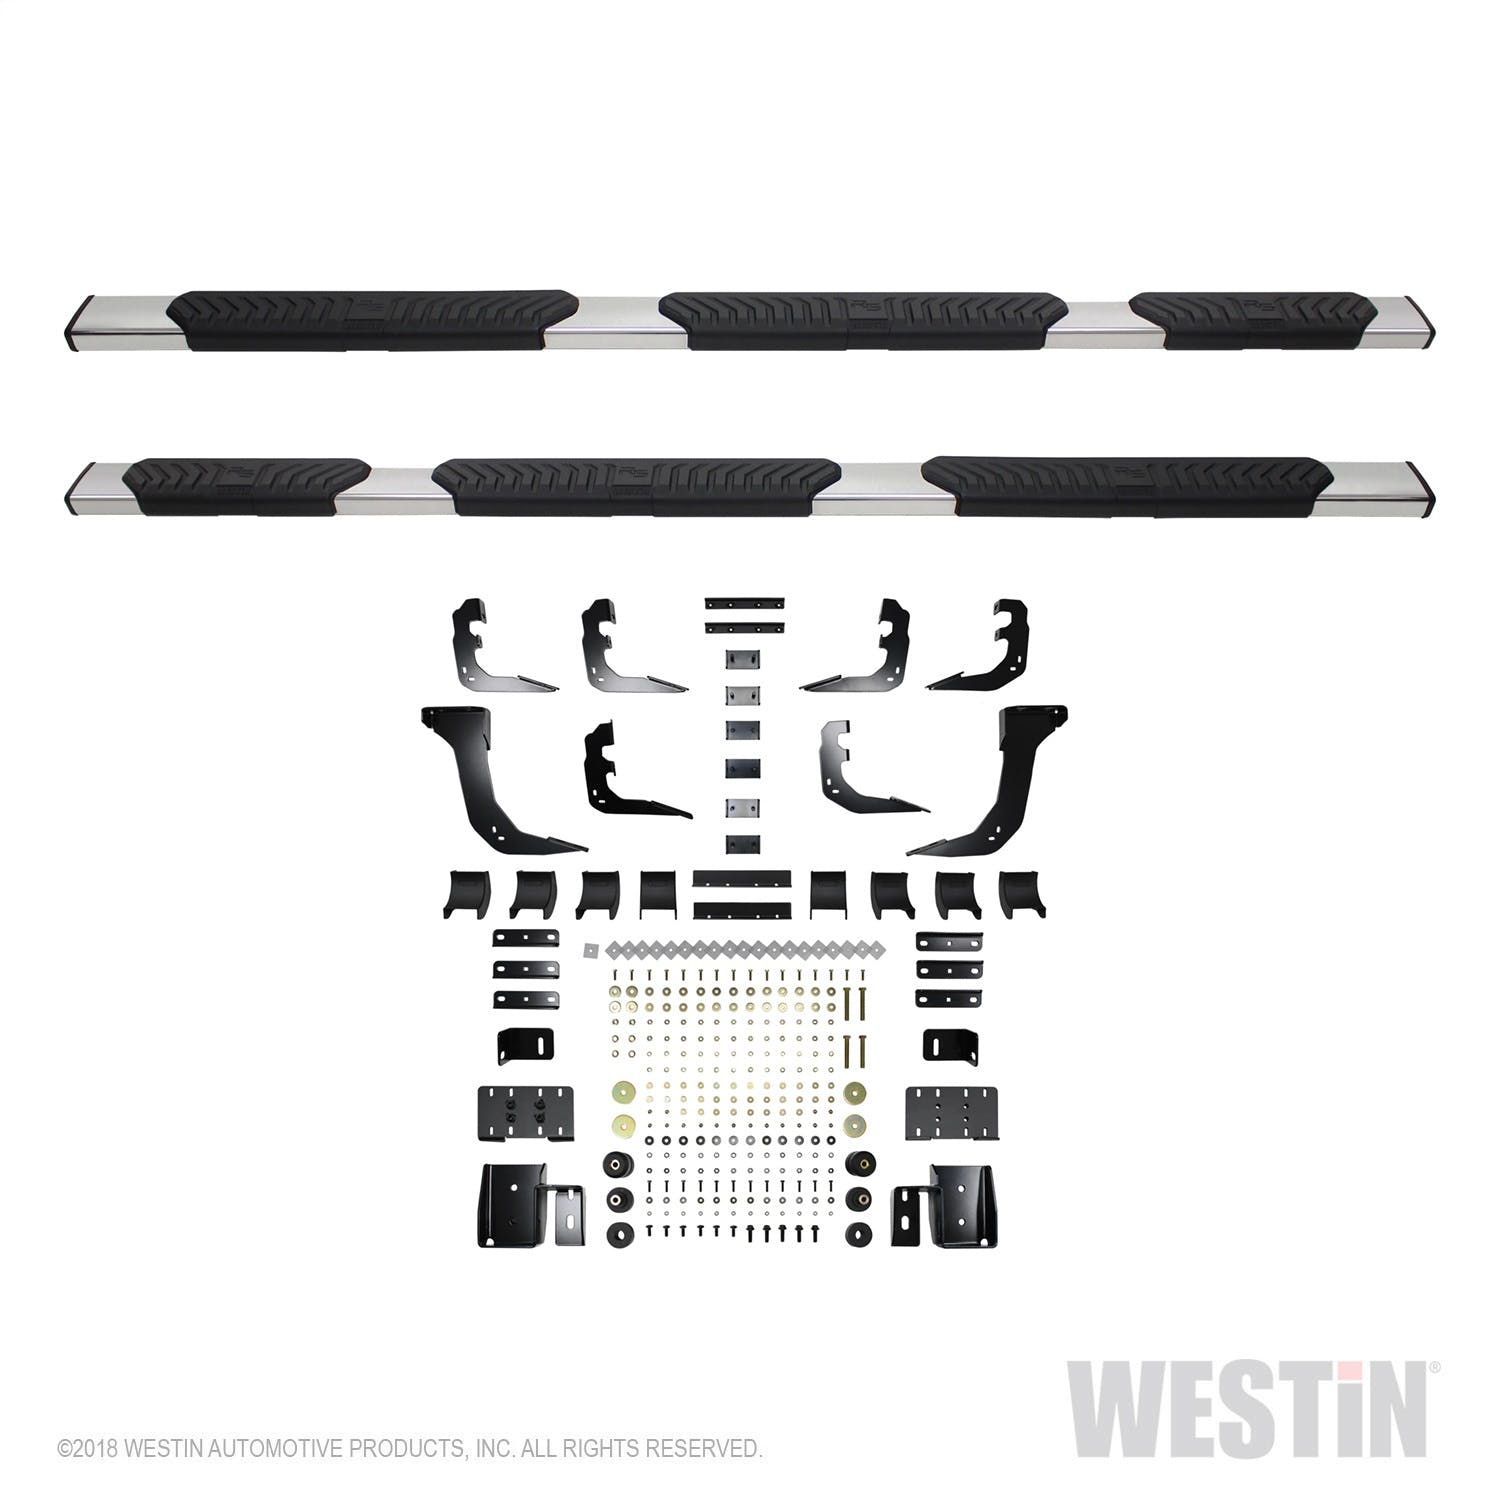 Westin Automotive 28-534700 R5 M-Series Wheel-to-Wheel Nerf Step Bars Polished Stainless